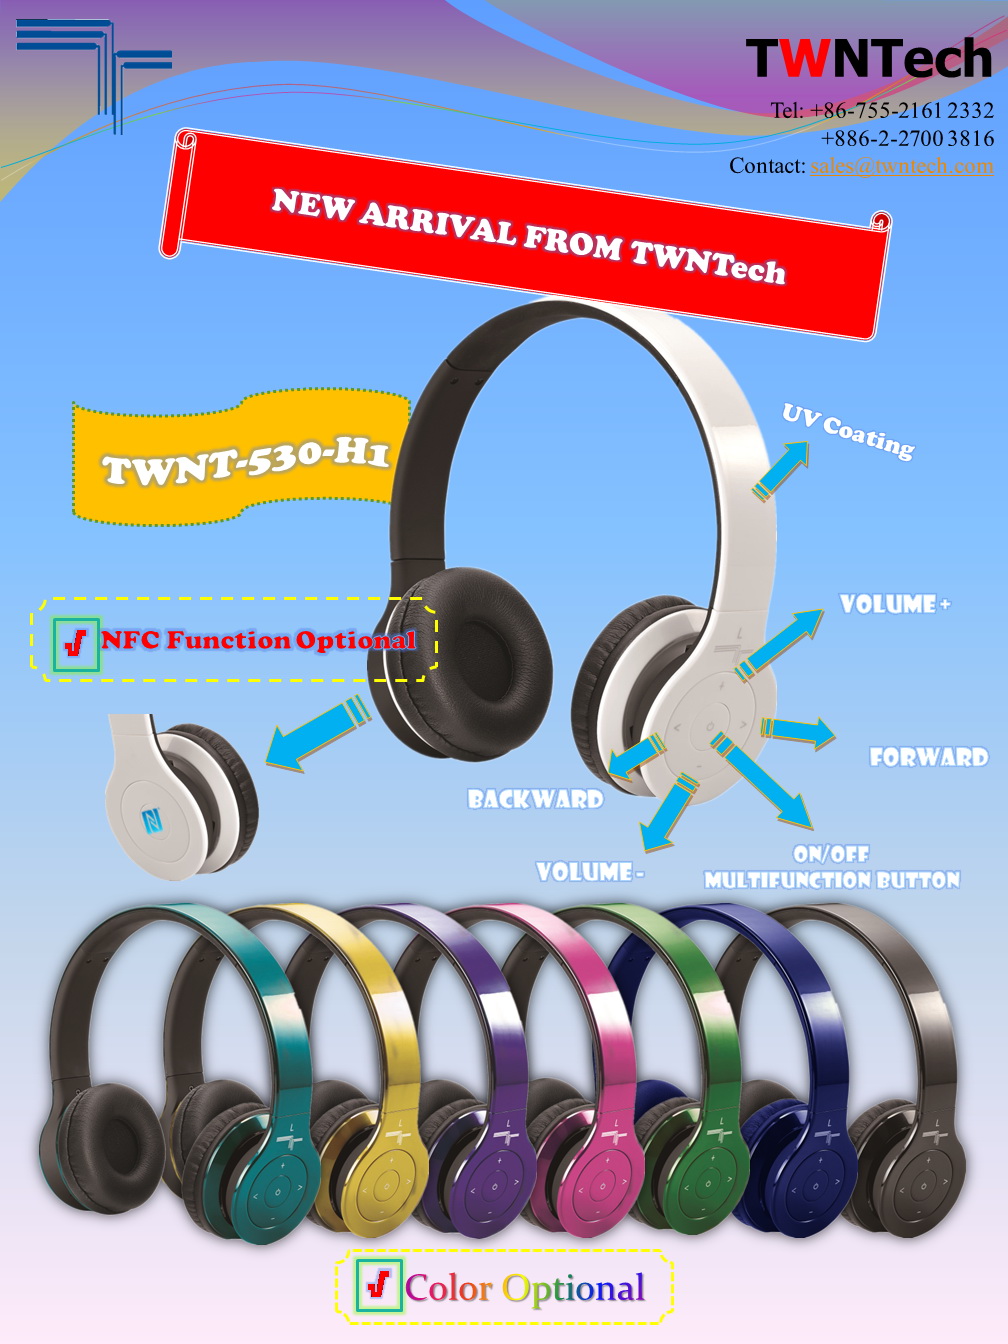 Premier Shape & Perfect Sound -- Bluetooth Stereo Headset TWNT-530-H1